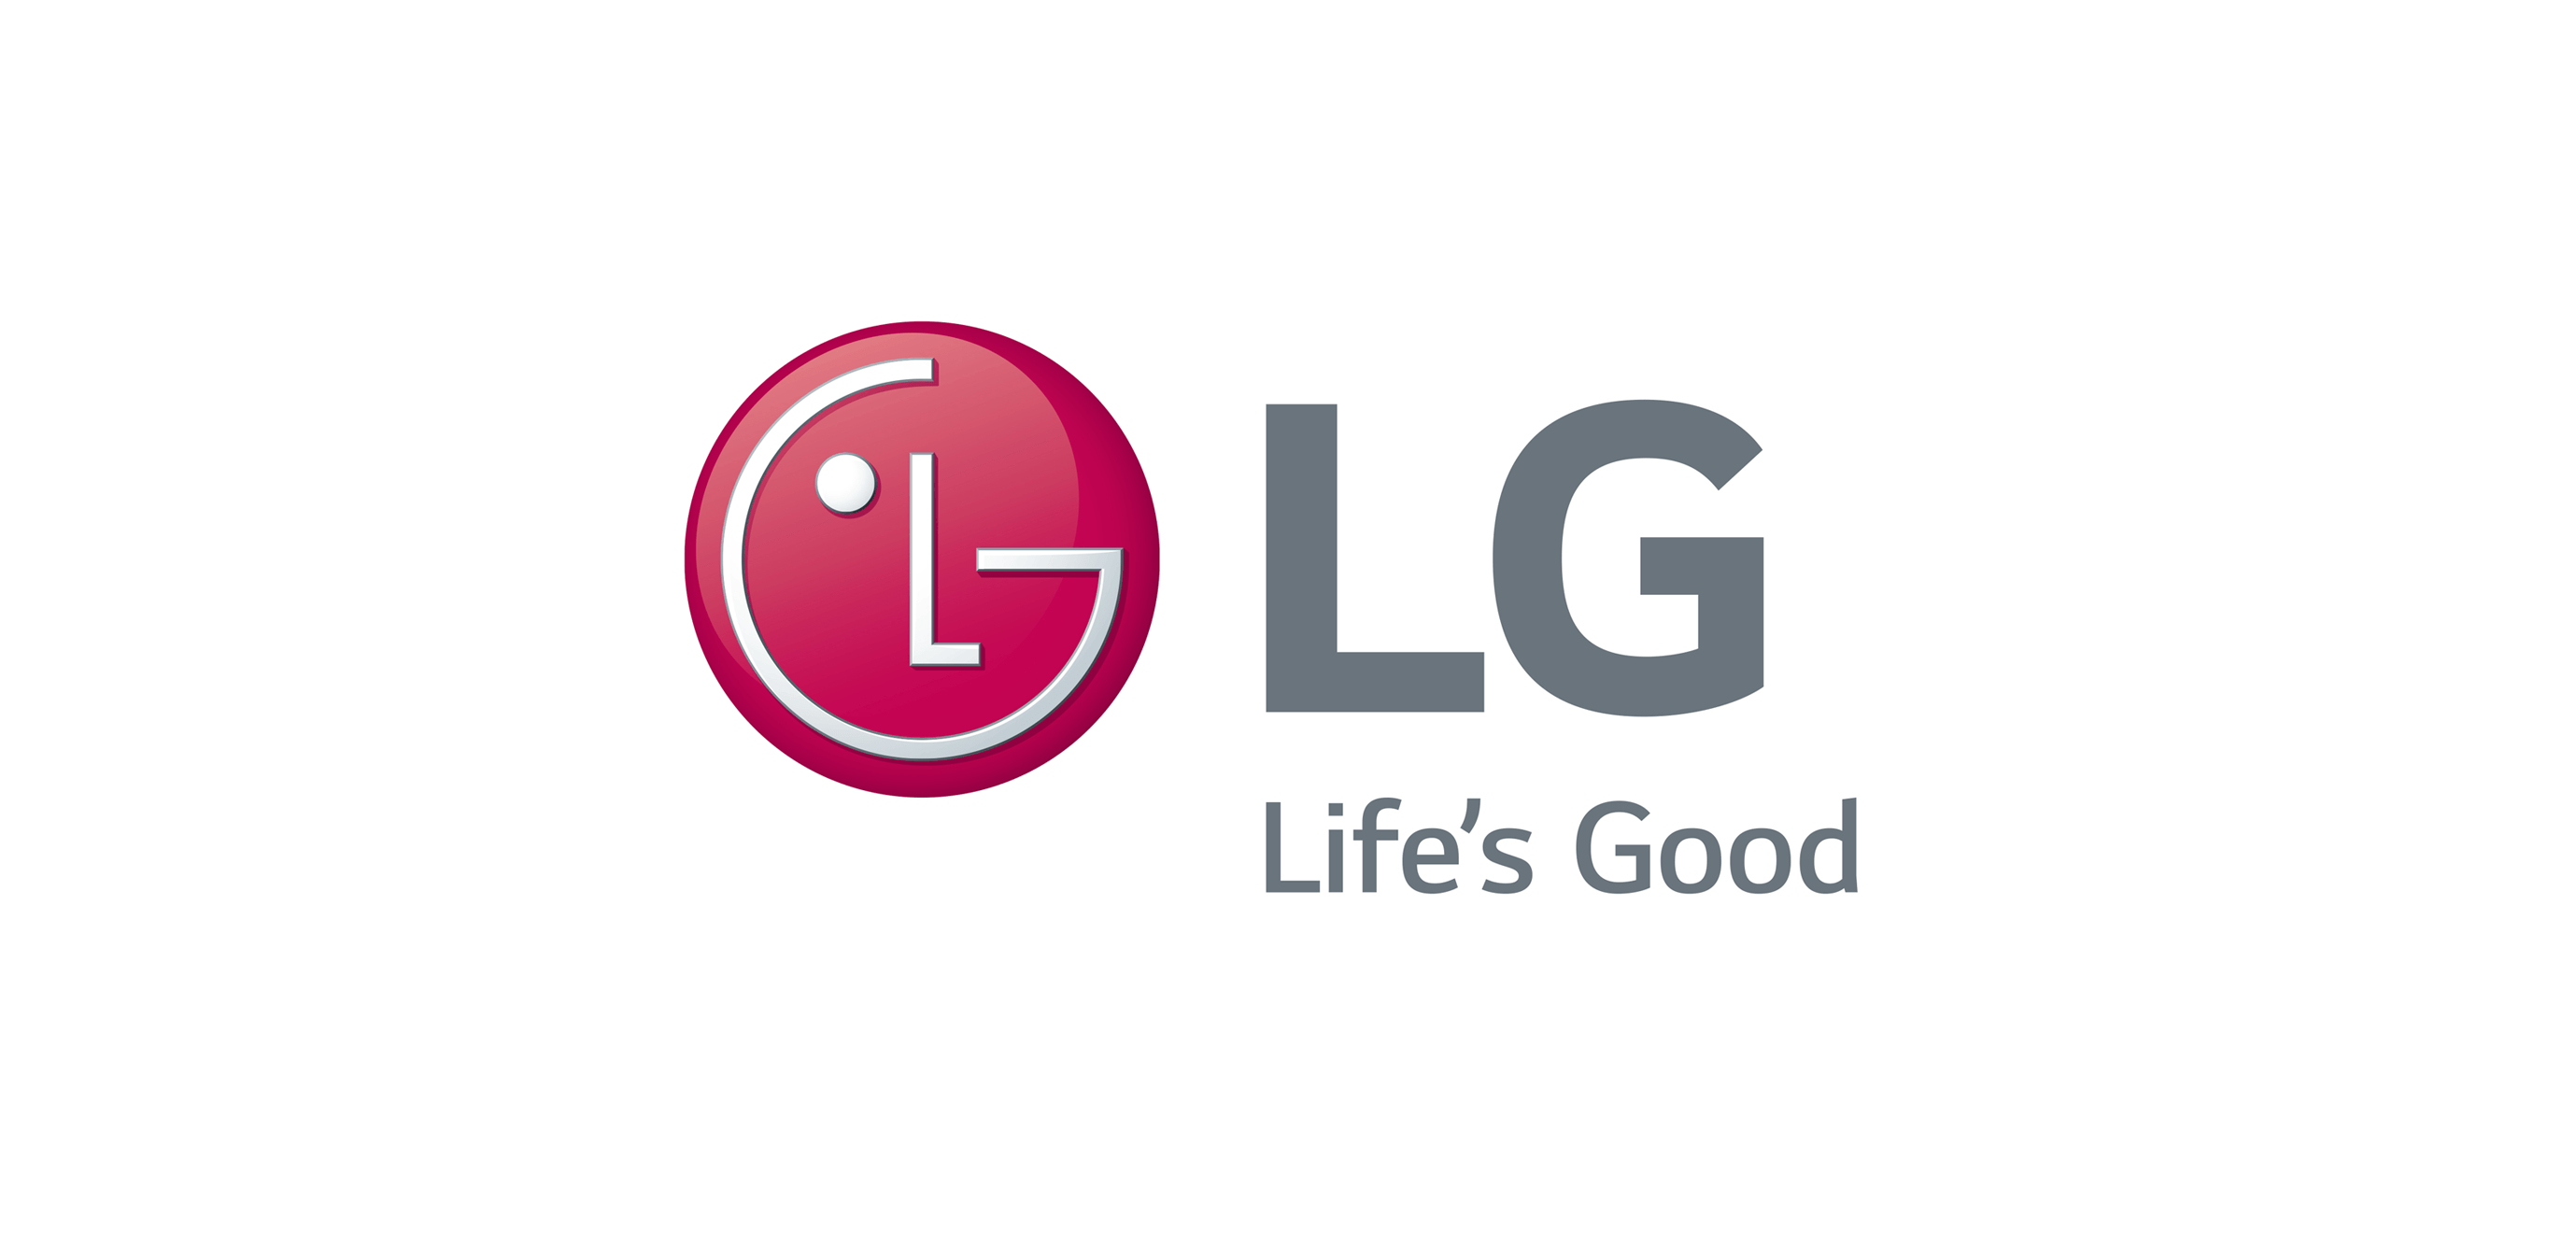 LG Ducted Air Conditioning Brisbane Supplier - Quality Air
